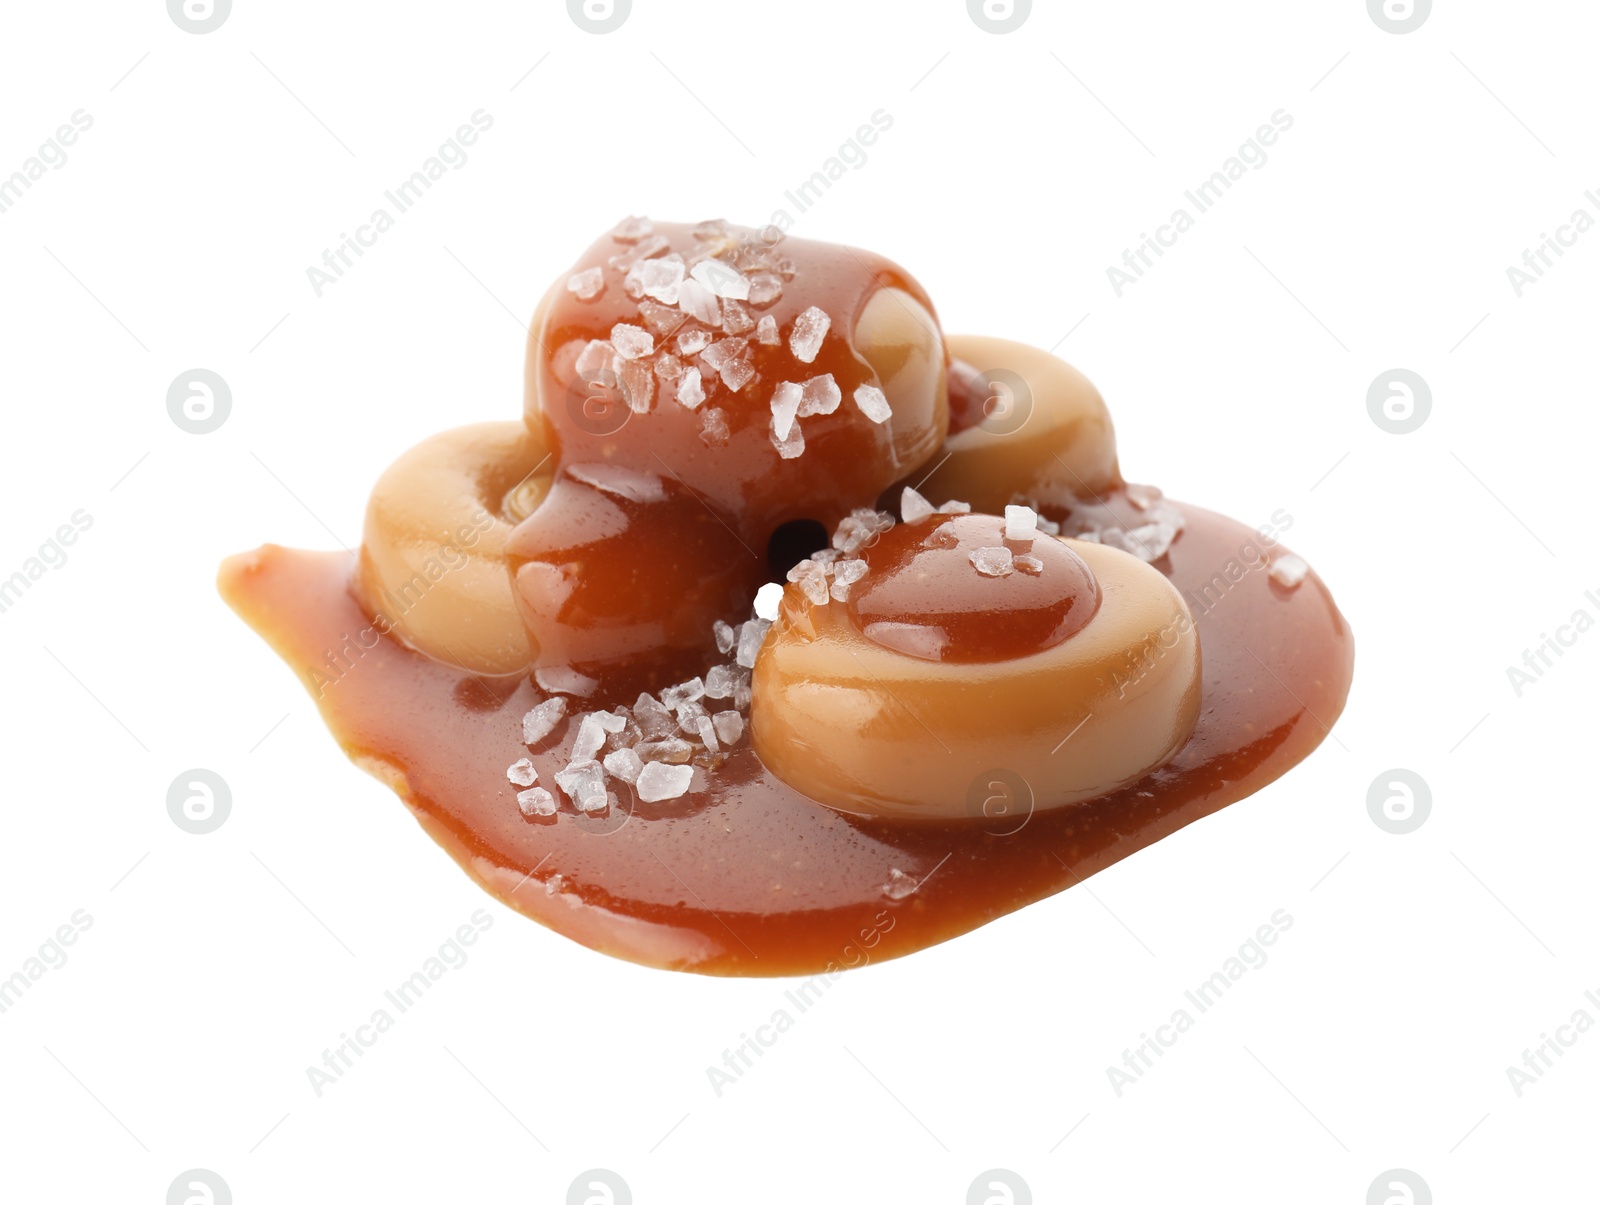 Photo of Yummy candies with caramel sauce and sea salt isolated on white